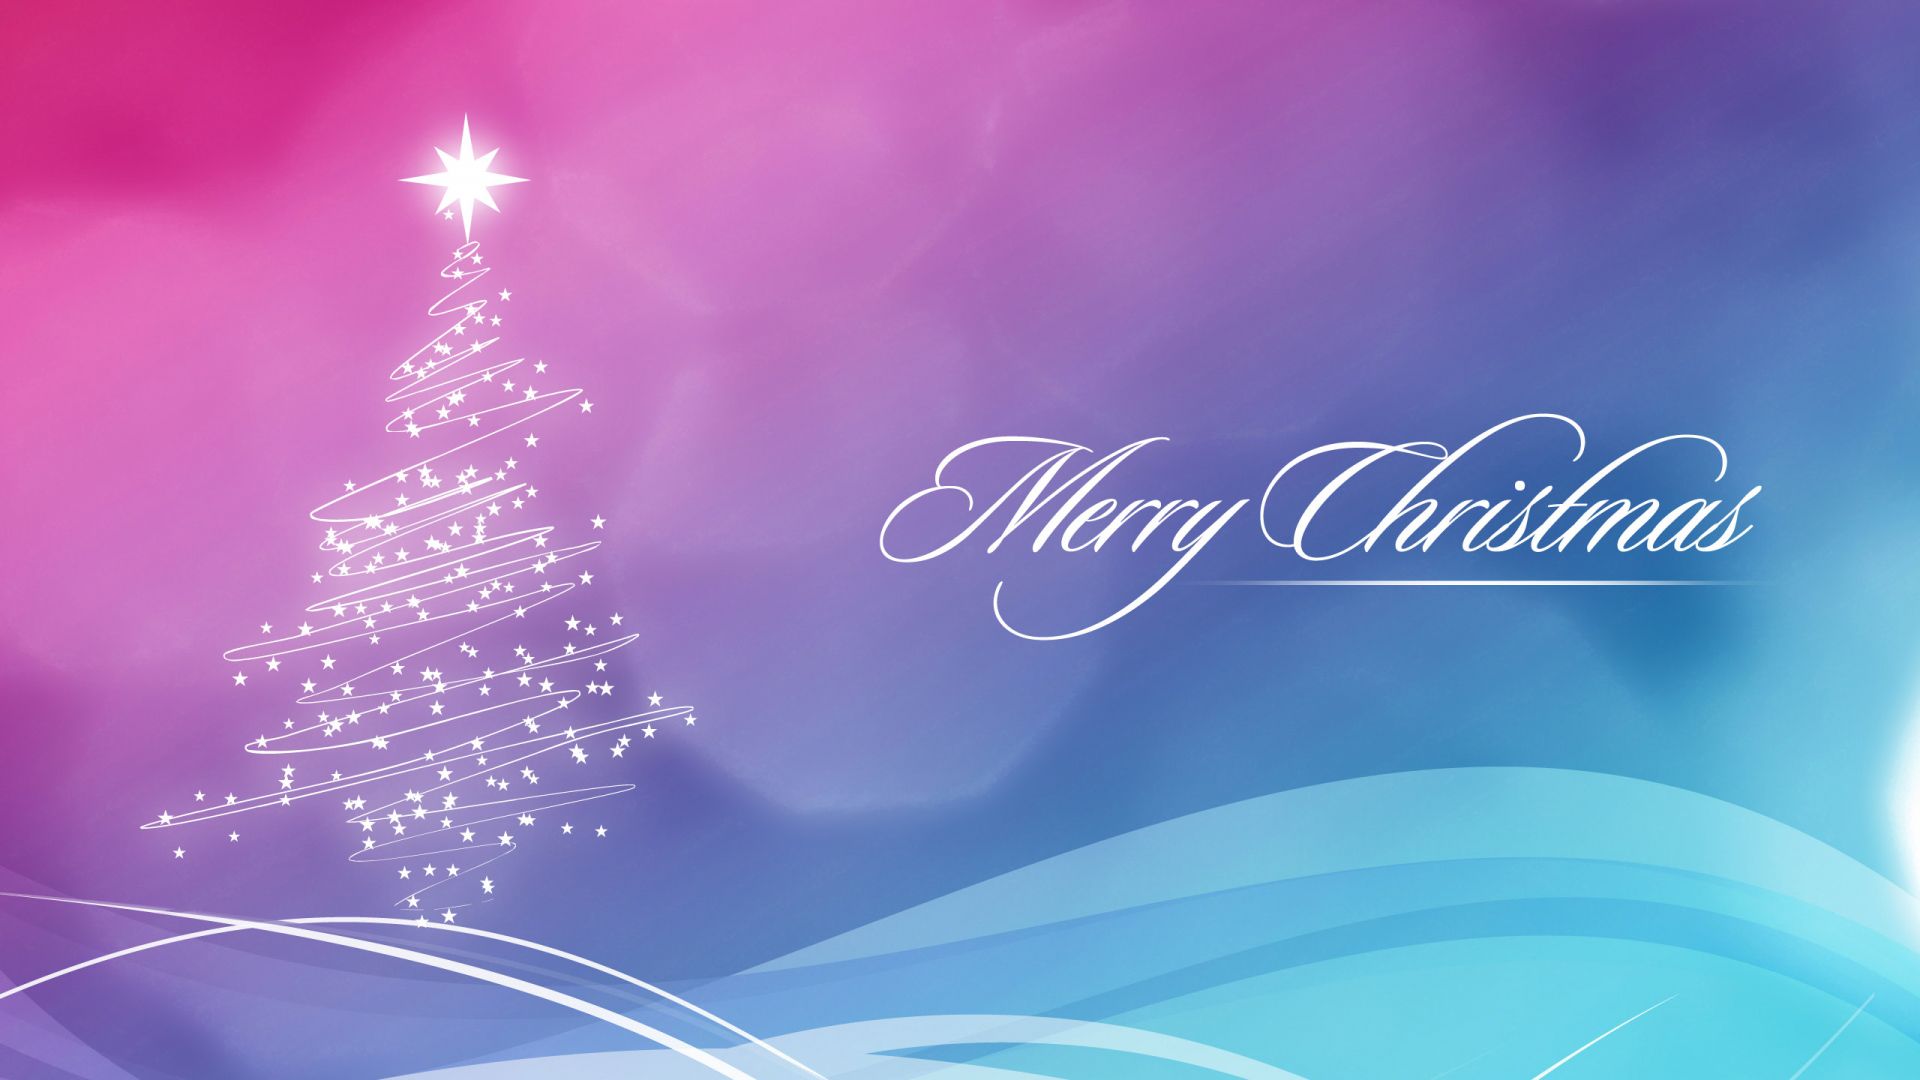 Free download 25 Merry Christmas Cover Photo For Facebook Timeline [2560x1600] for your Desktop, Mobile & Tablet. Explore Christmas Picture For Wallpaper. Free Christmas Wallpaper, Christmas Desktop Free Holiday